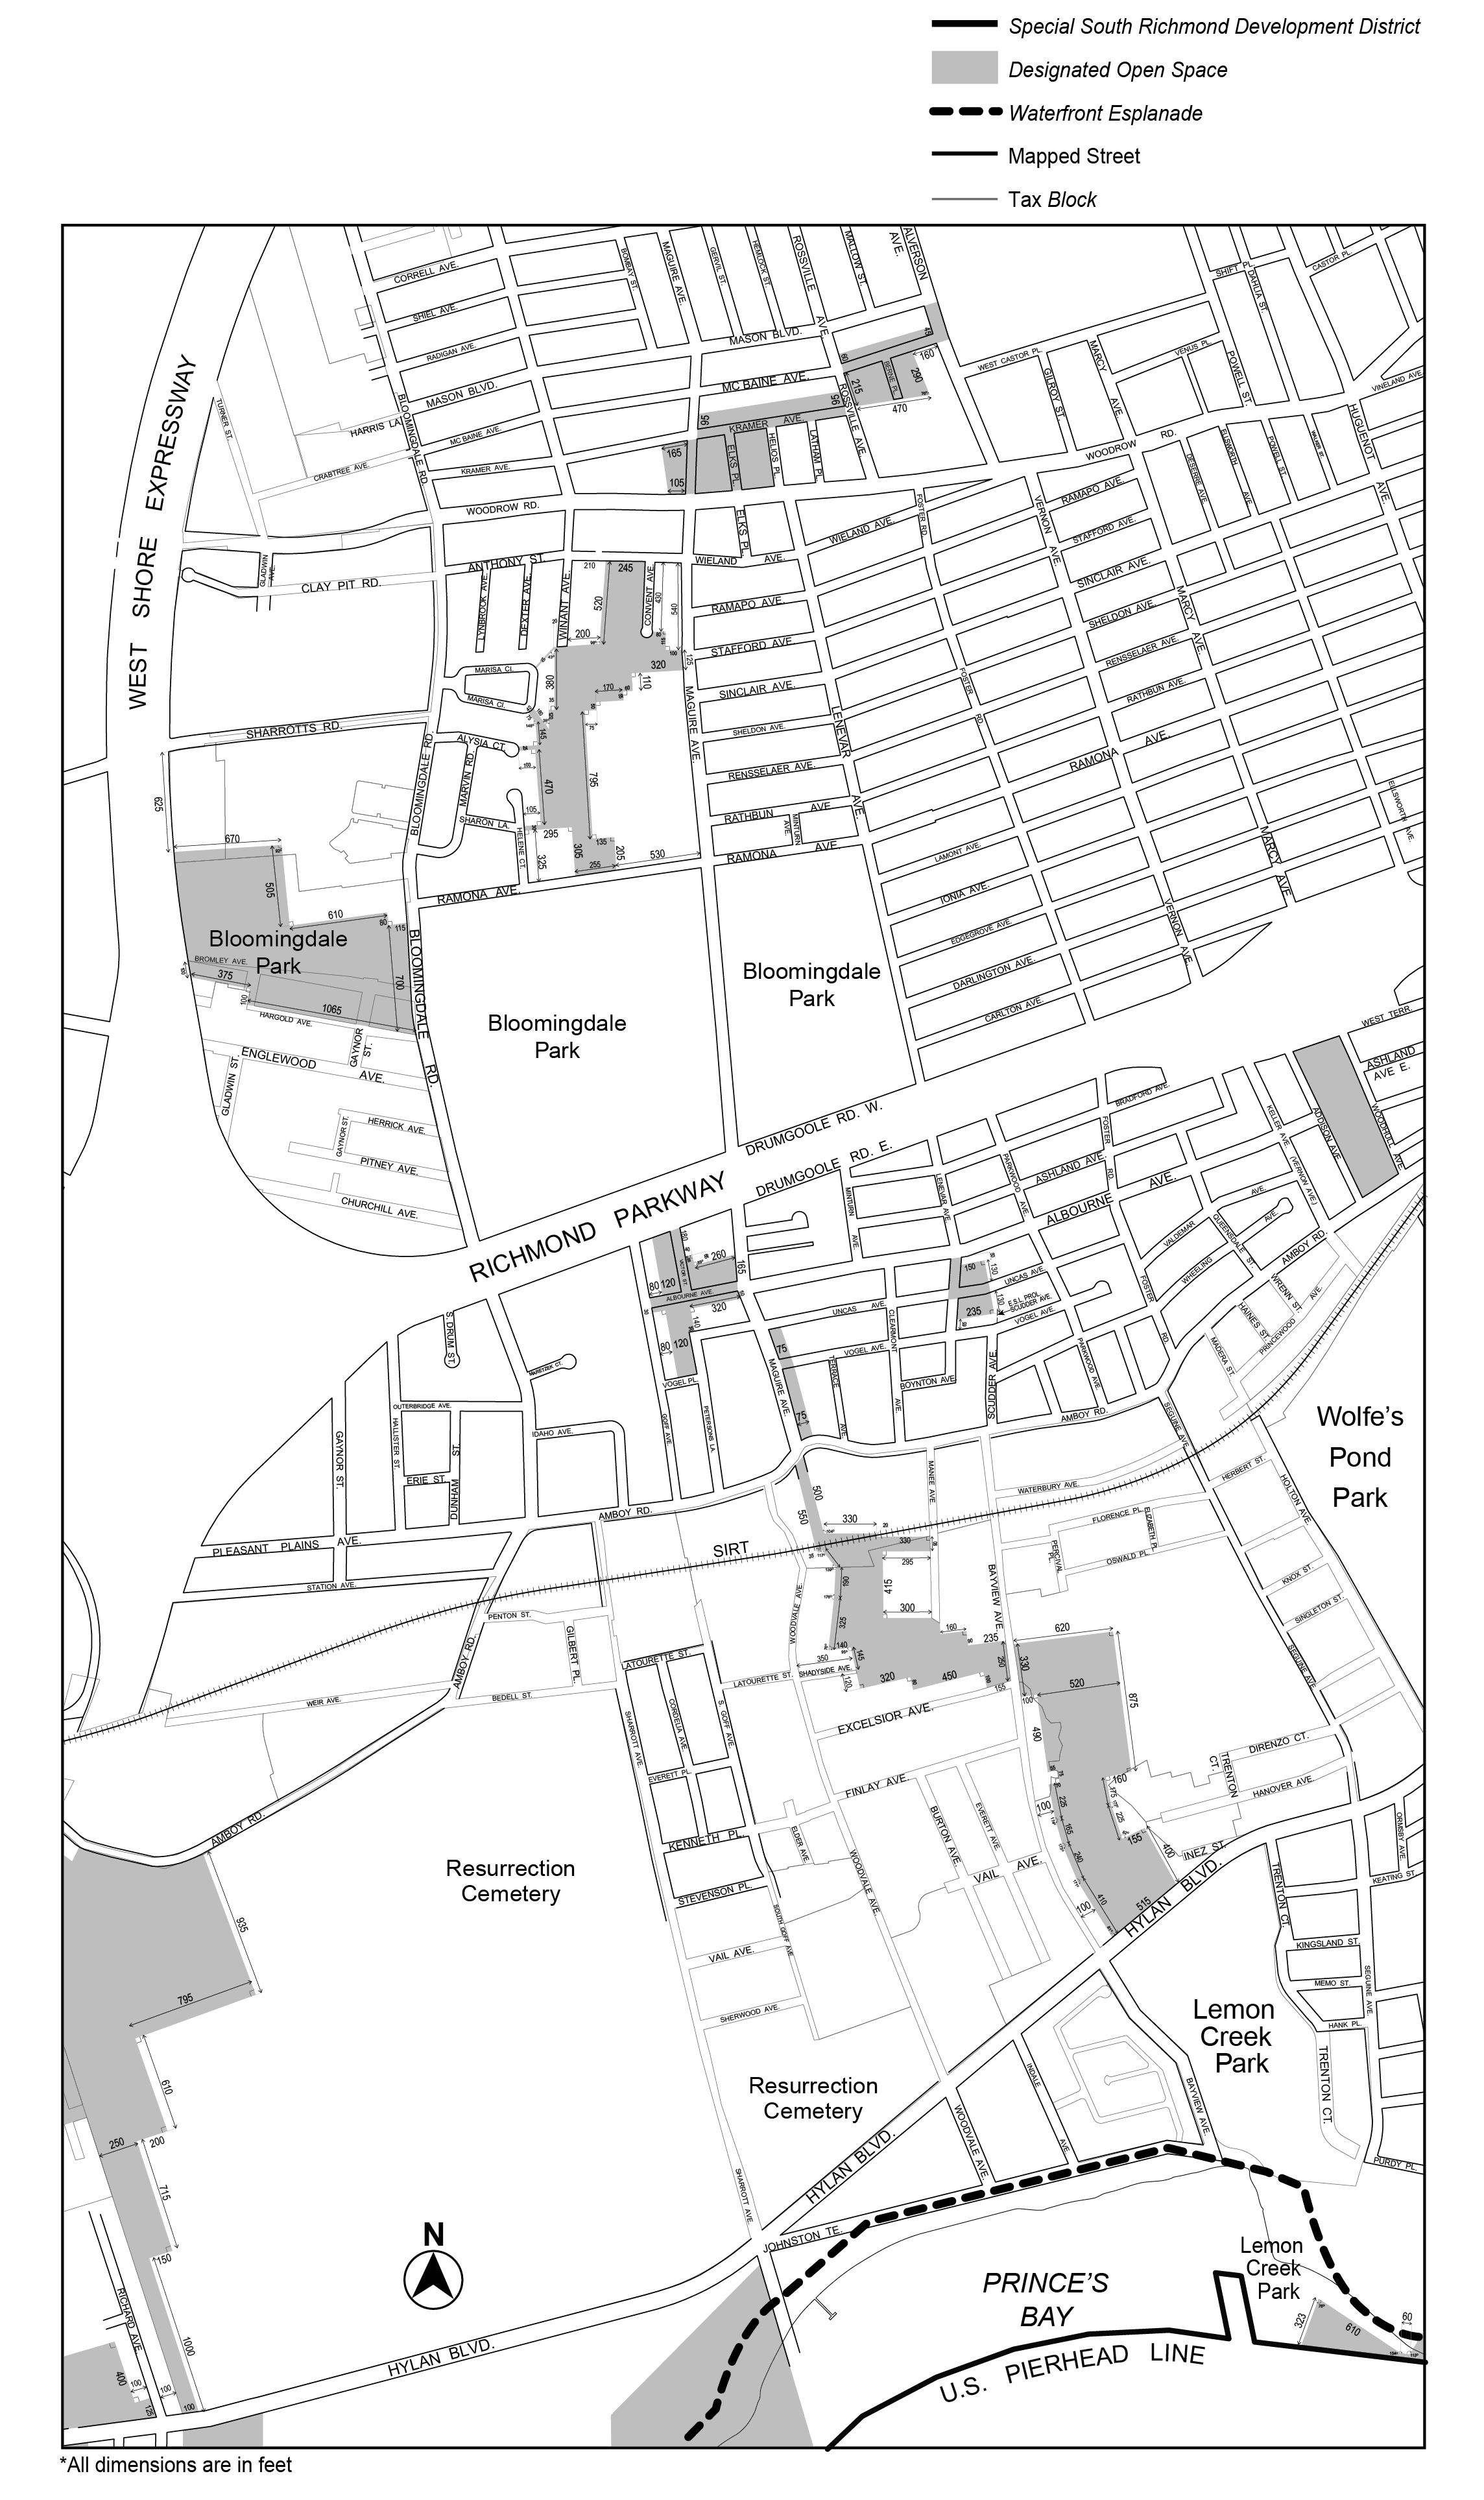  Article X, Chapter 7, Appendix A, Map 3.2 amended per N 230112 ZRR (South Richmond Zoning Relief) adopted by City Council 11/2/23